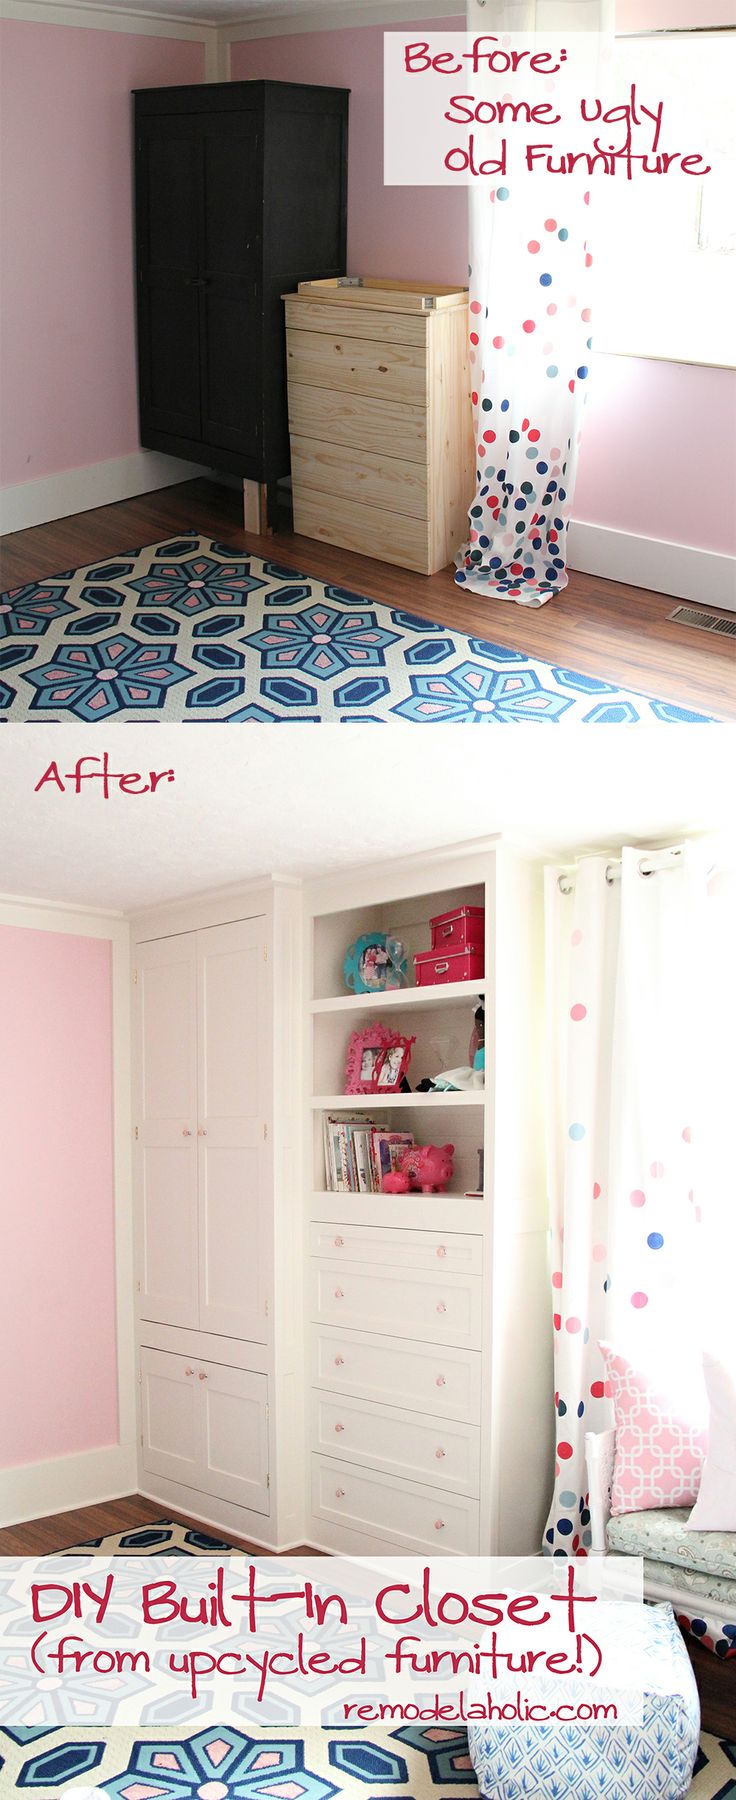 From old furniture to built in closet